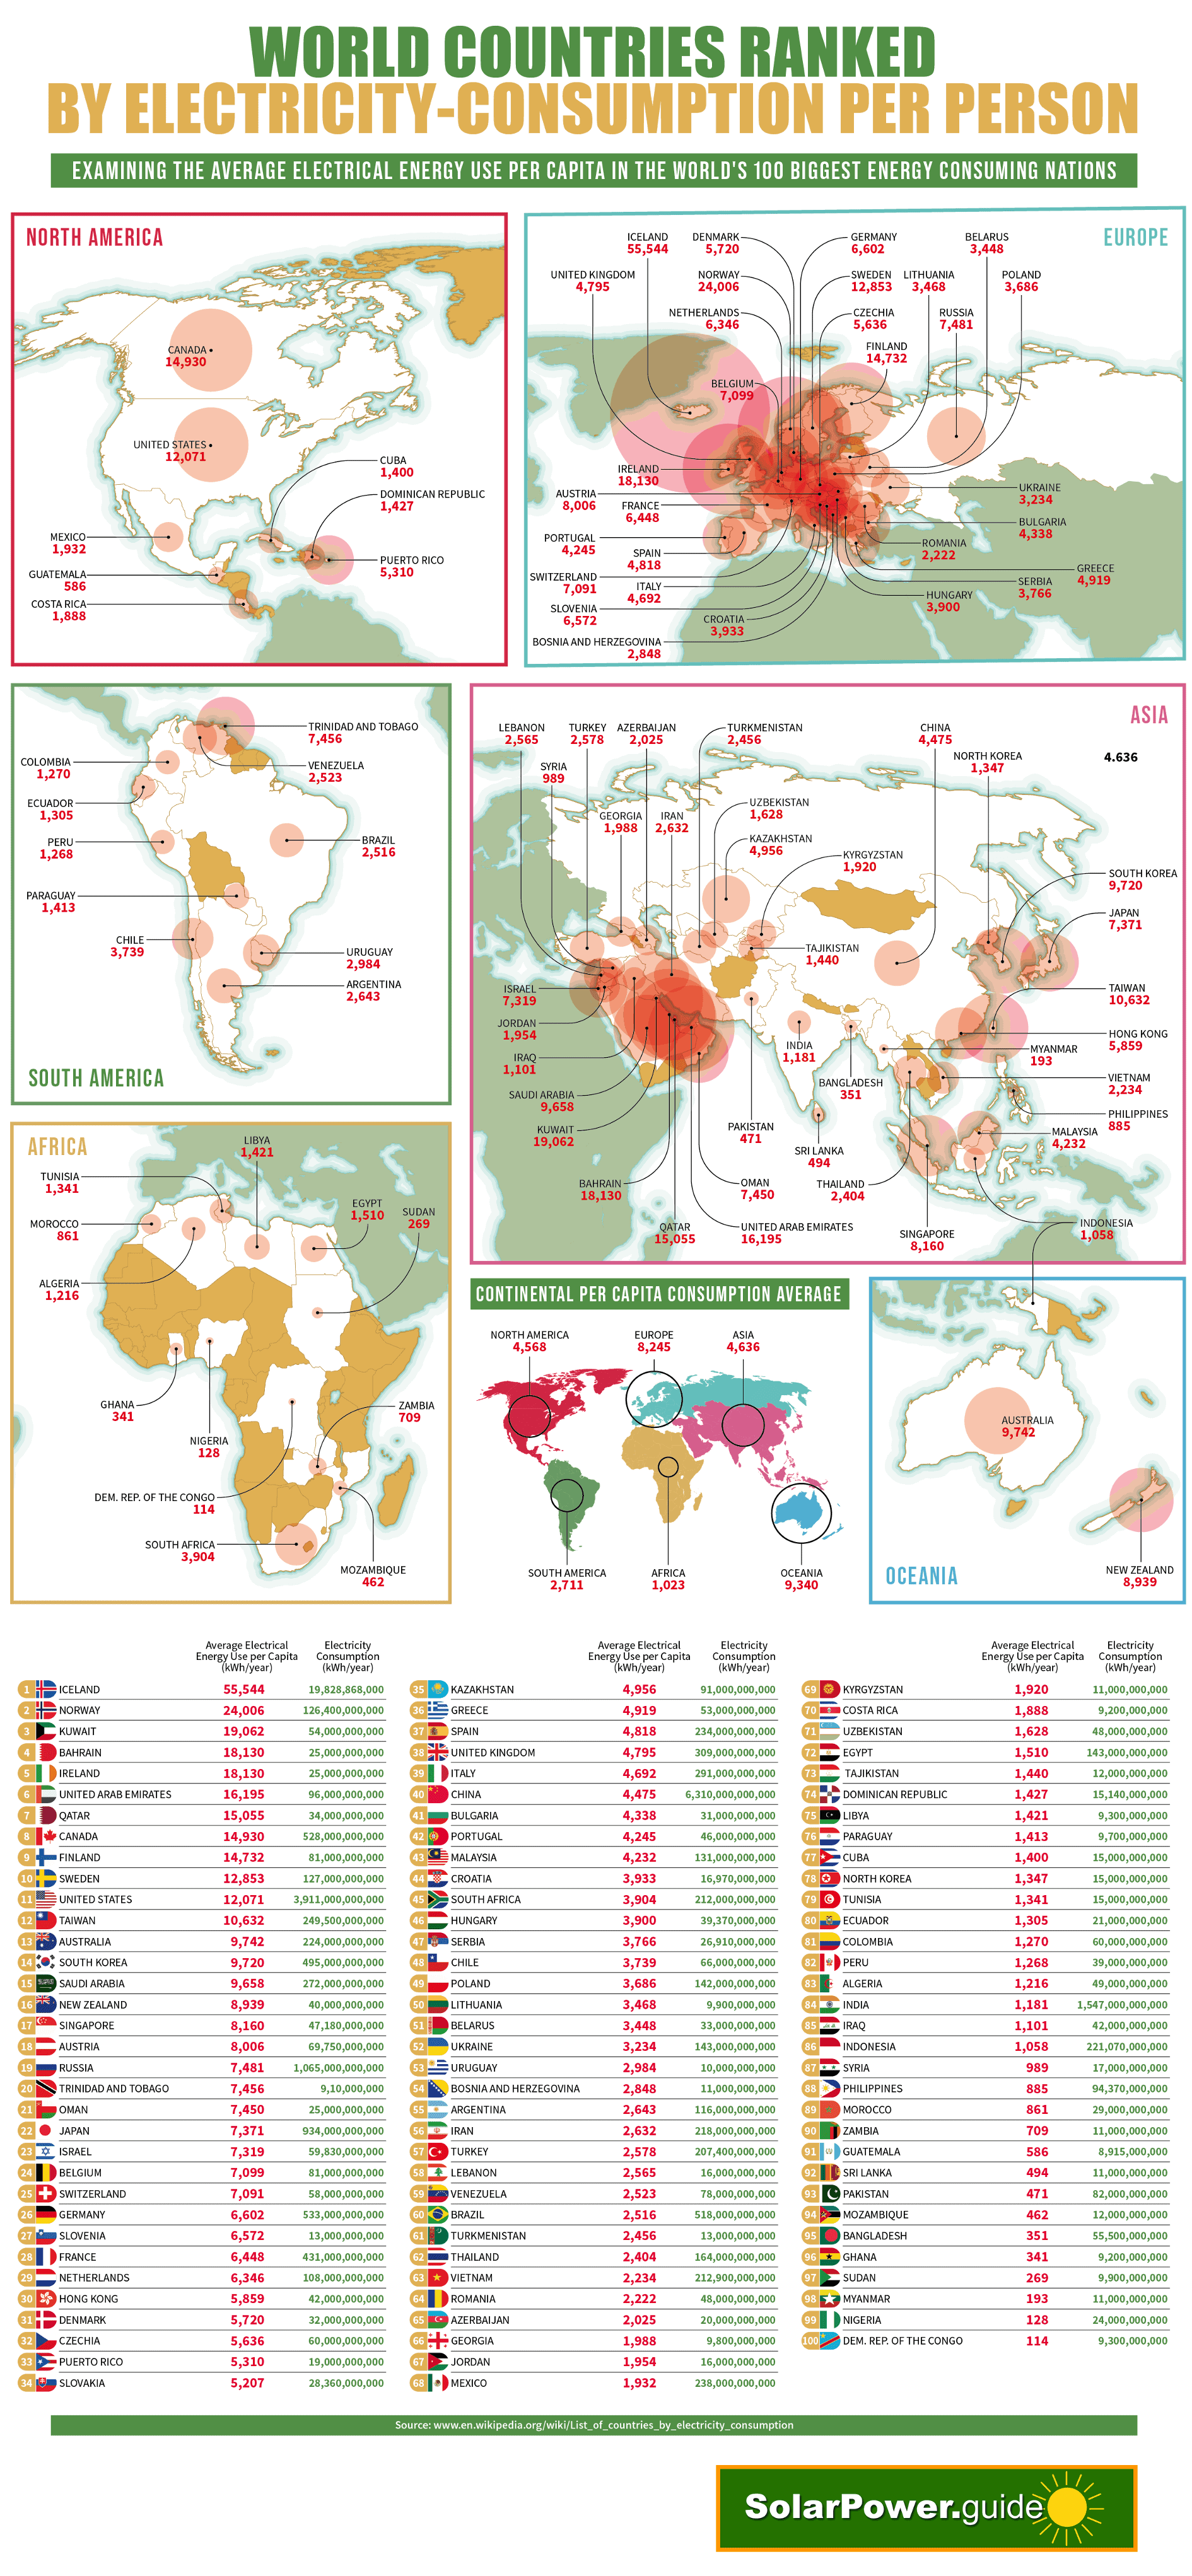 World Countries Ranked by Electricity Consumption